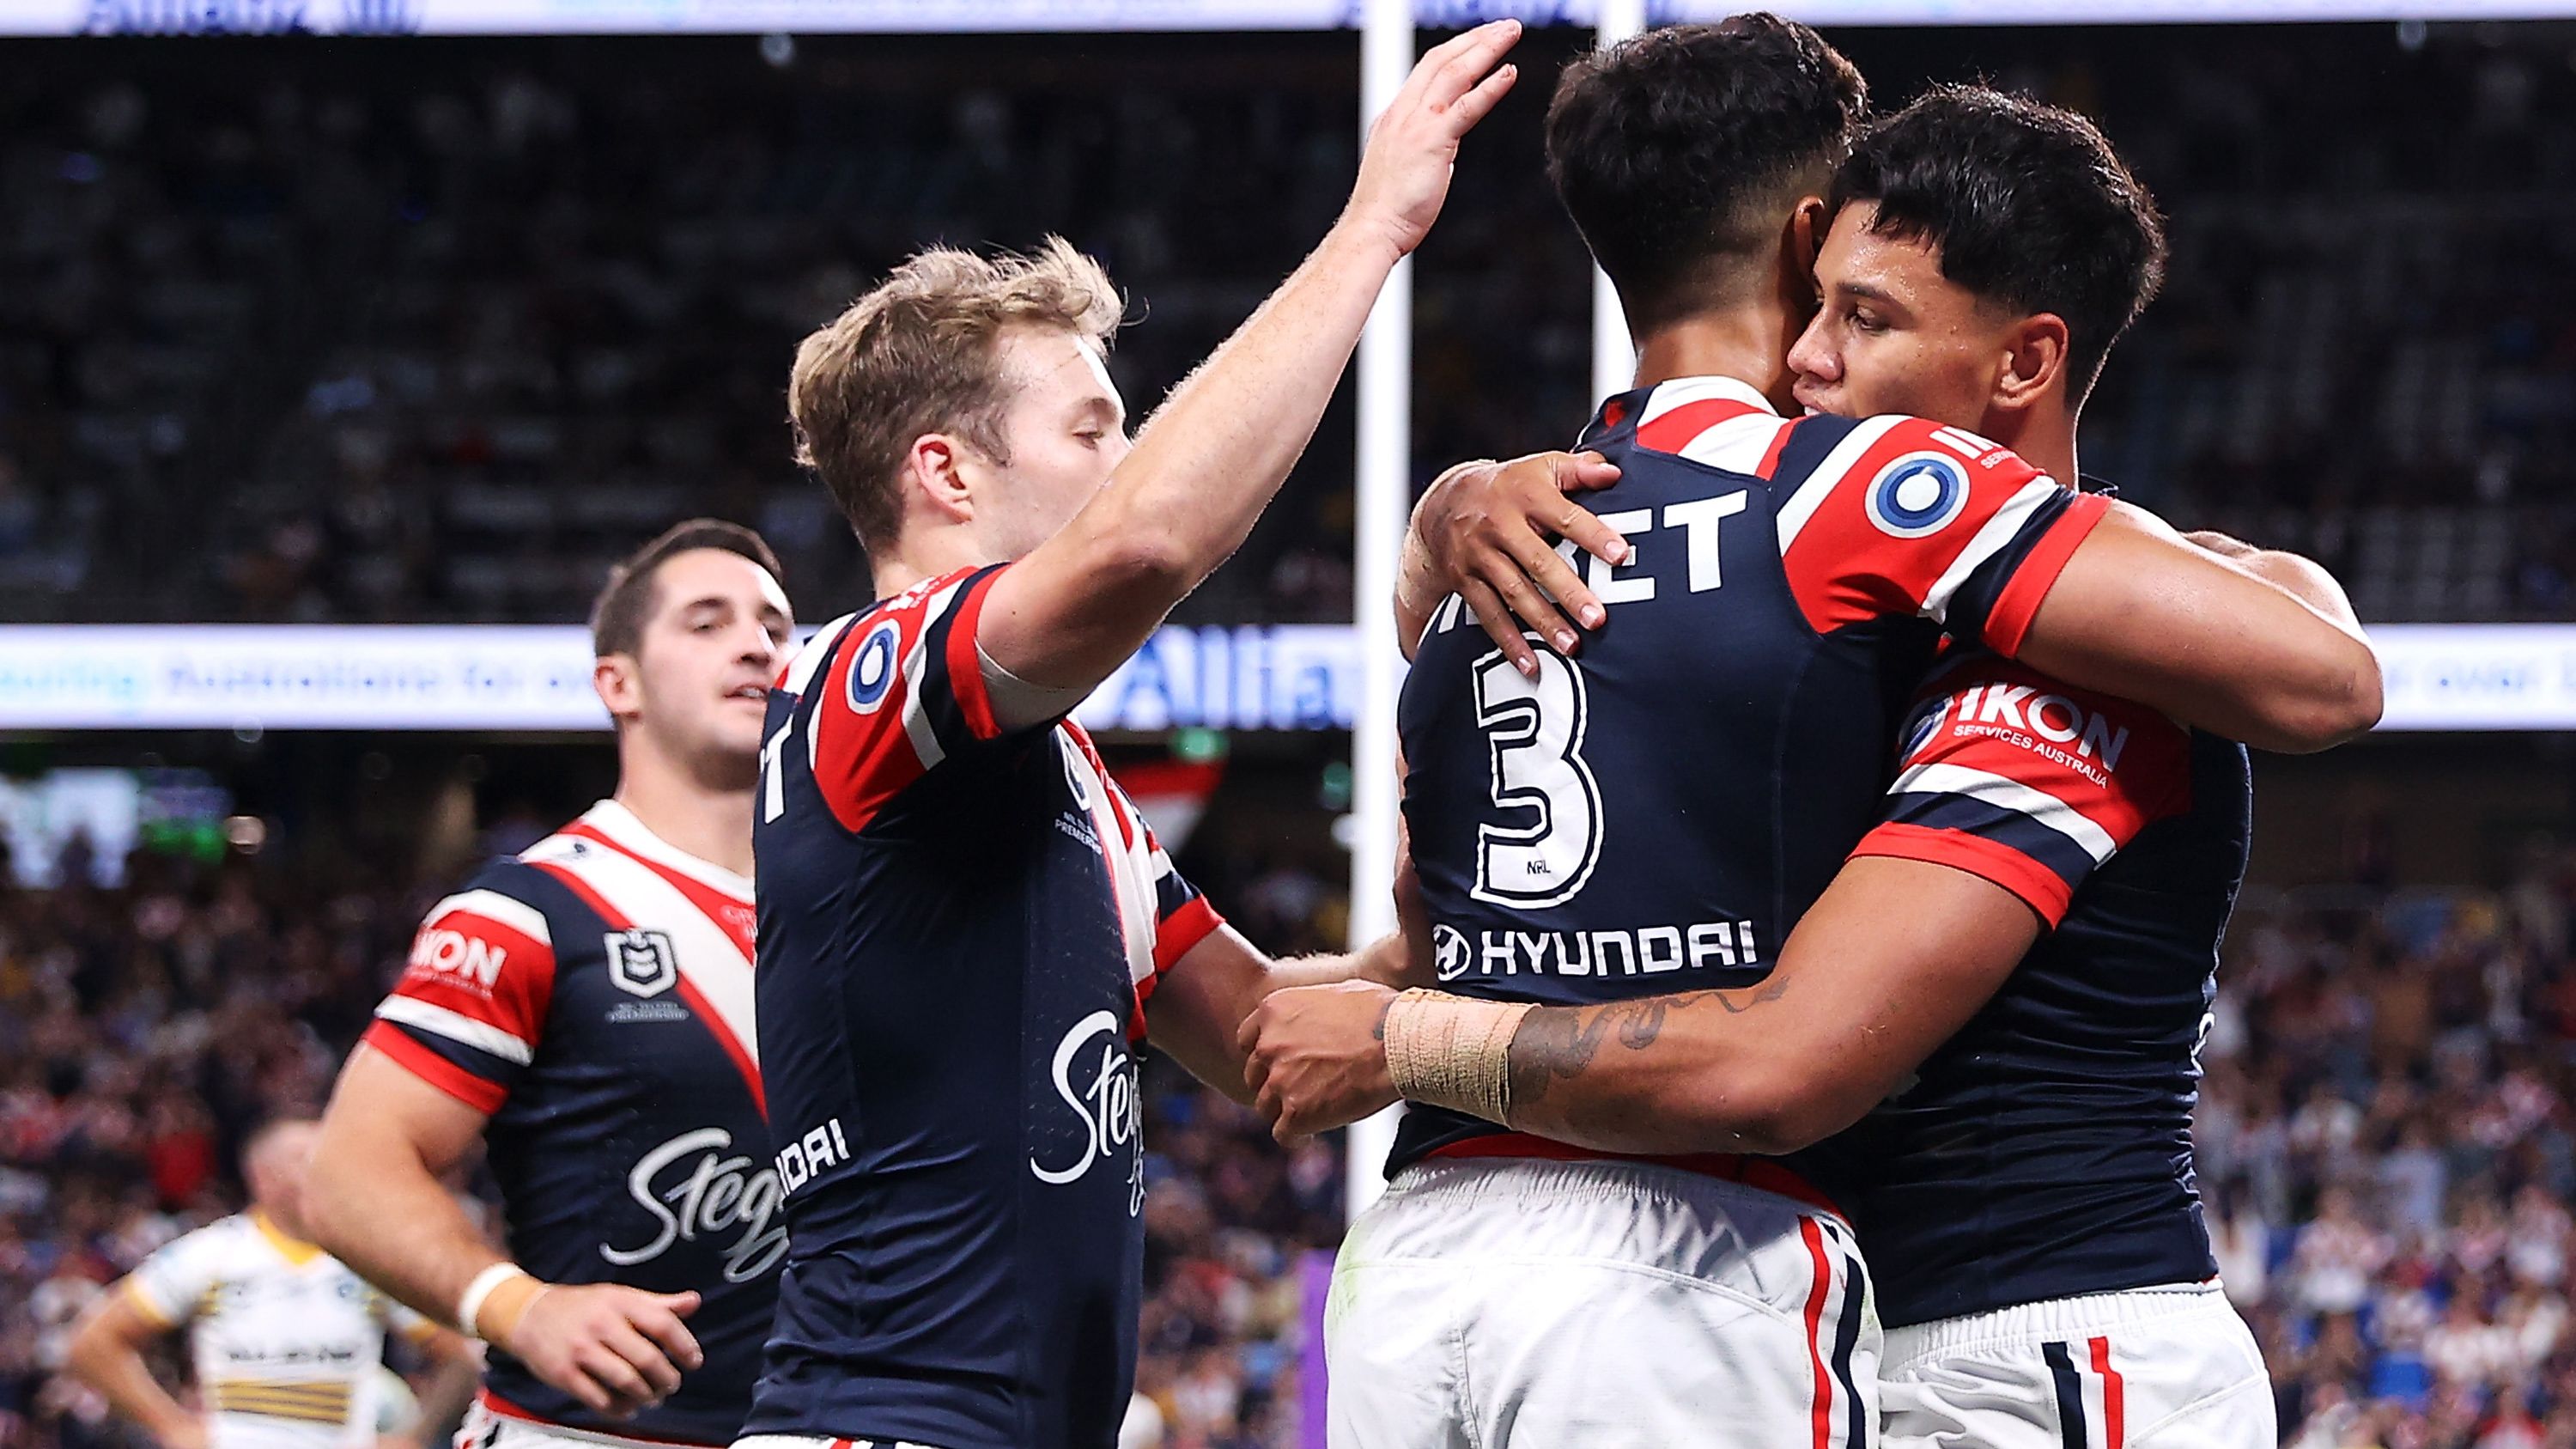 Jaxon Paulo celebrates with his teammates after scoring a try during the round five NRL match between the Sydney Roosters and the Parramatta Eels.